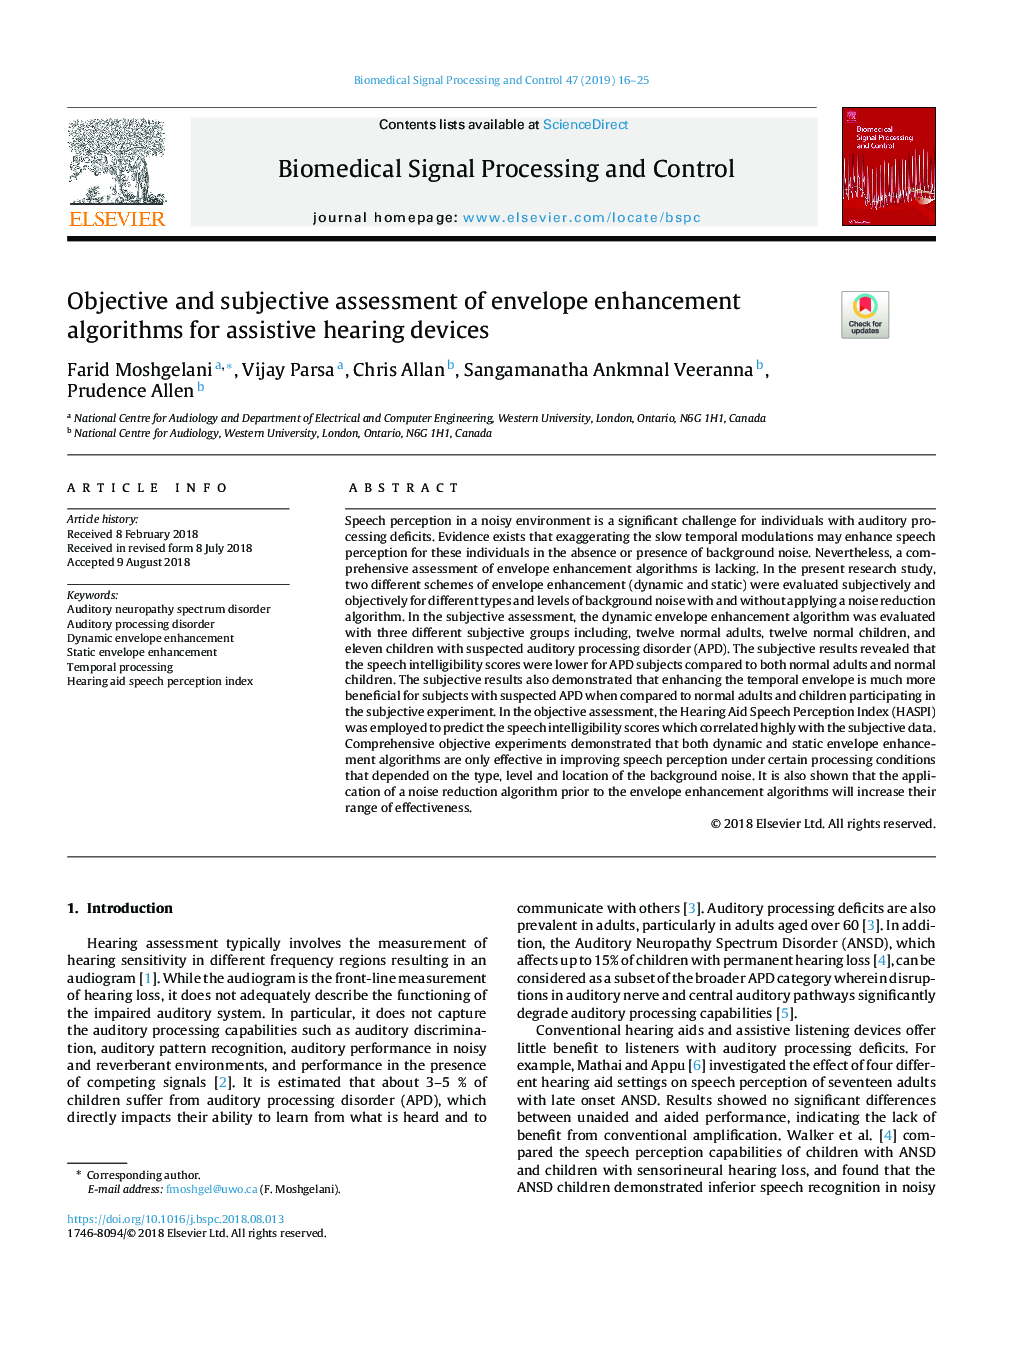 Objective and subjective assessment of envelope enhancement algorithms for assistive hearing devices